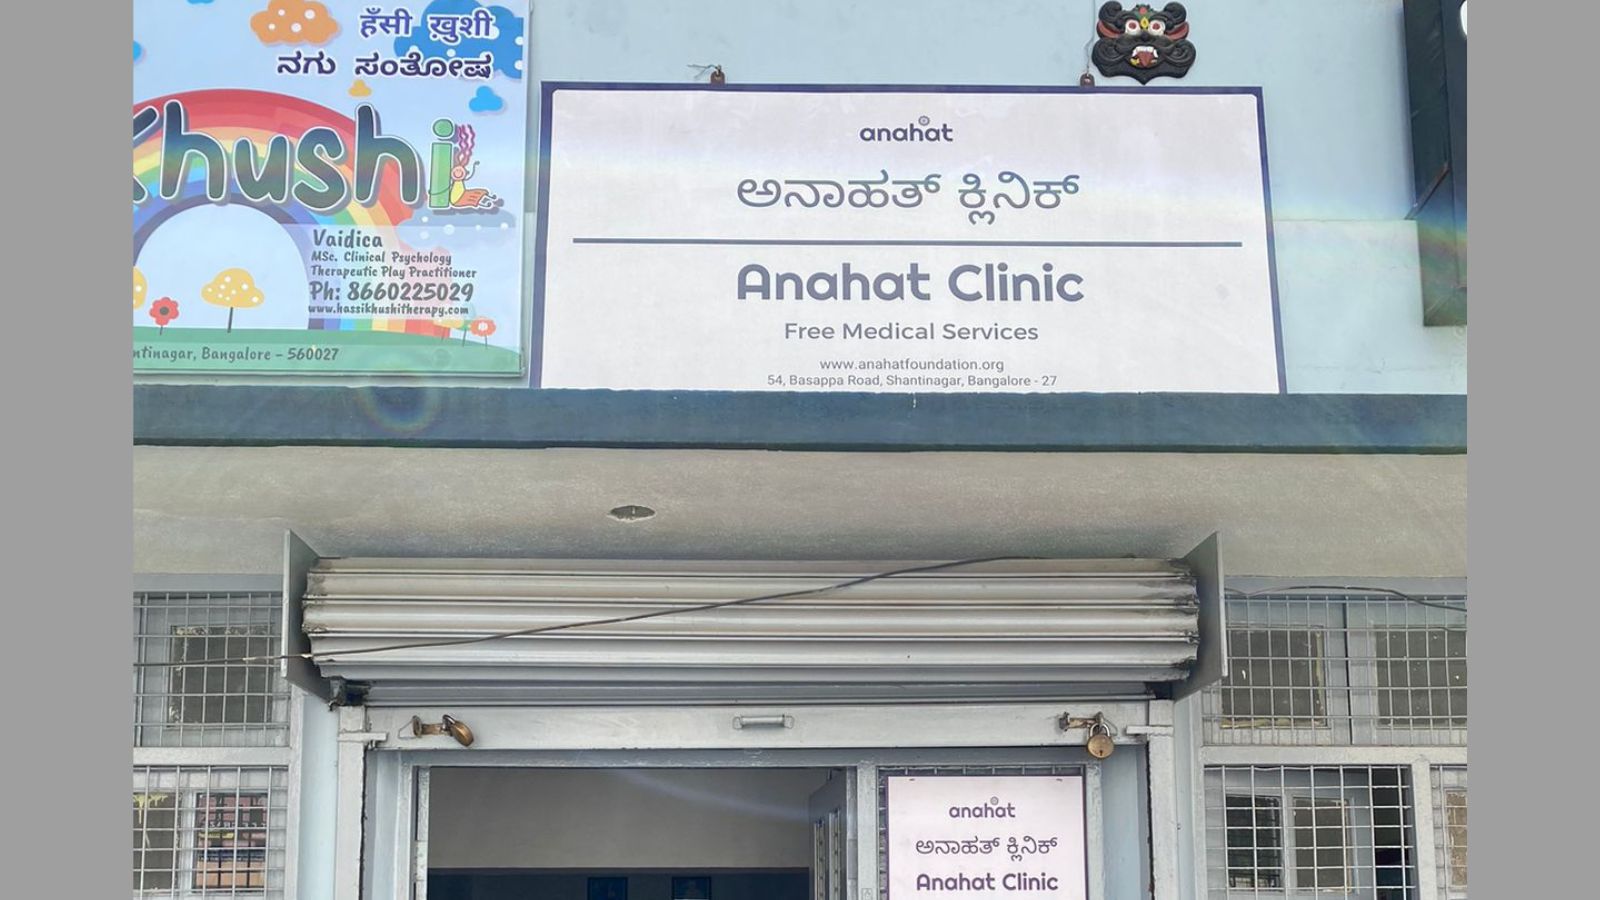 services are accorded to patients through Anahat Clinic located in the heart of Bengaluru in Shantinagar.